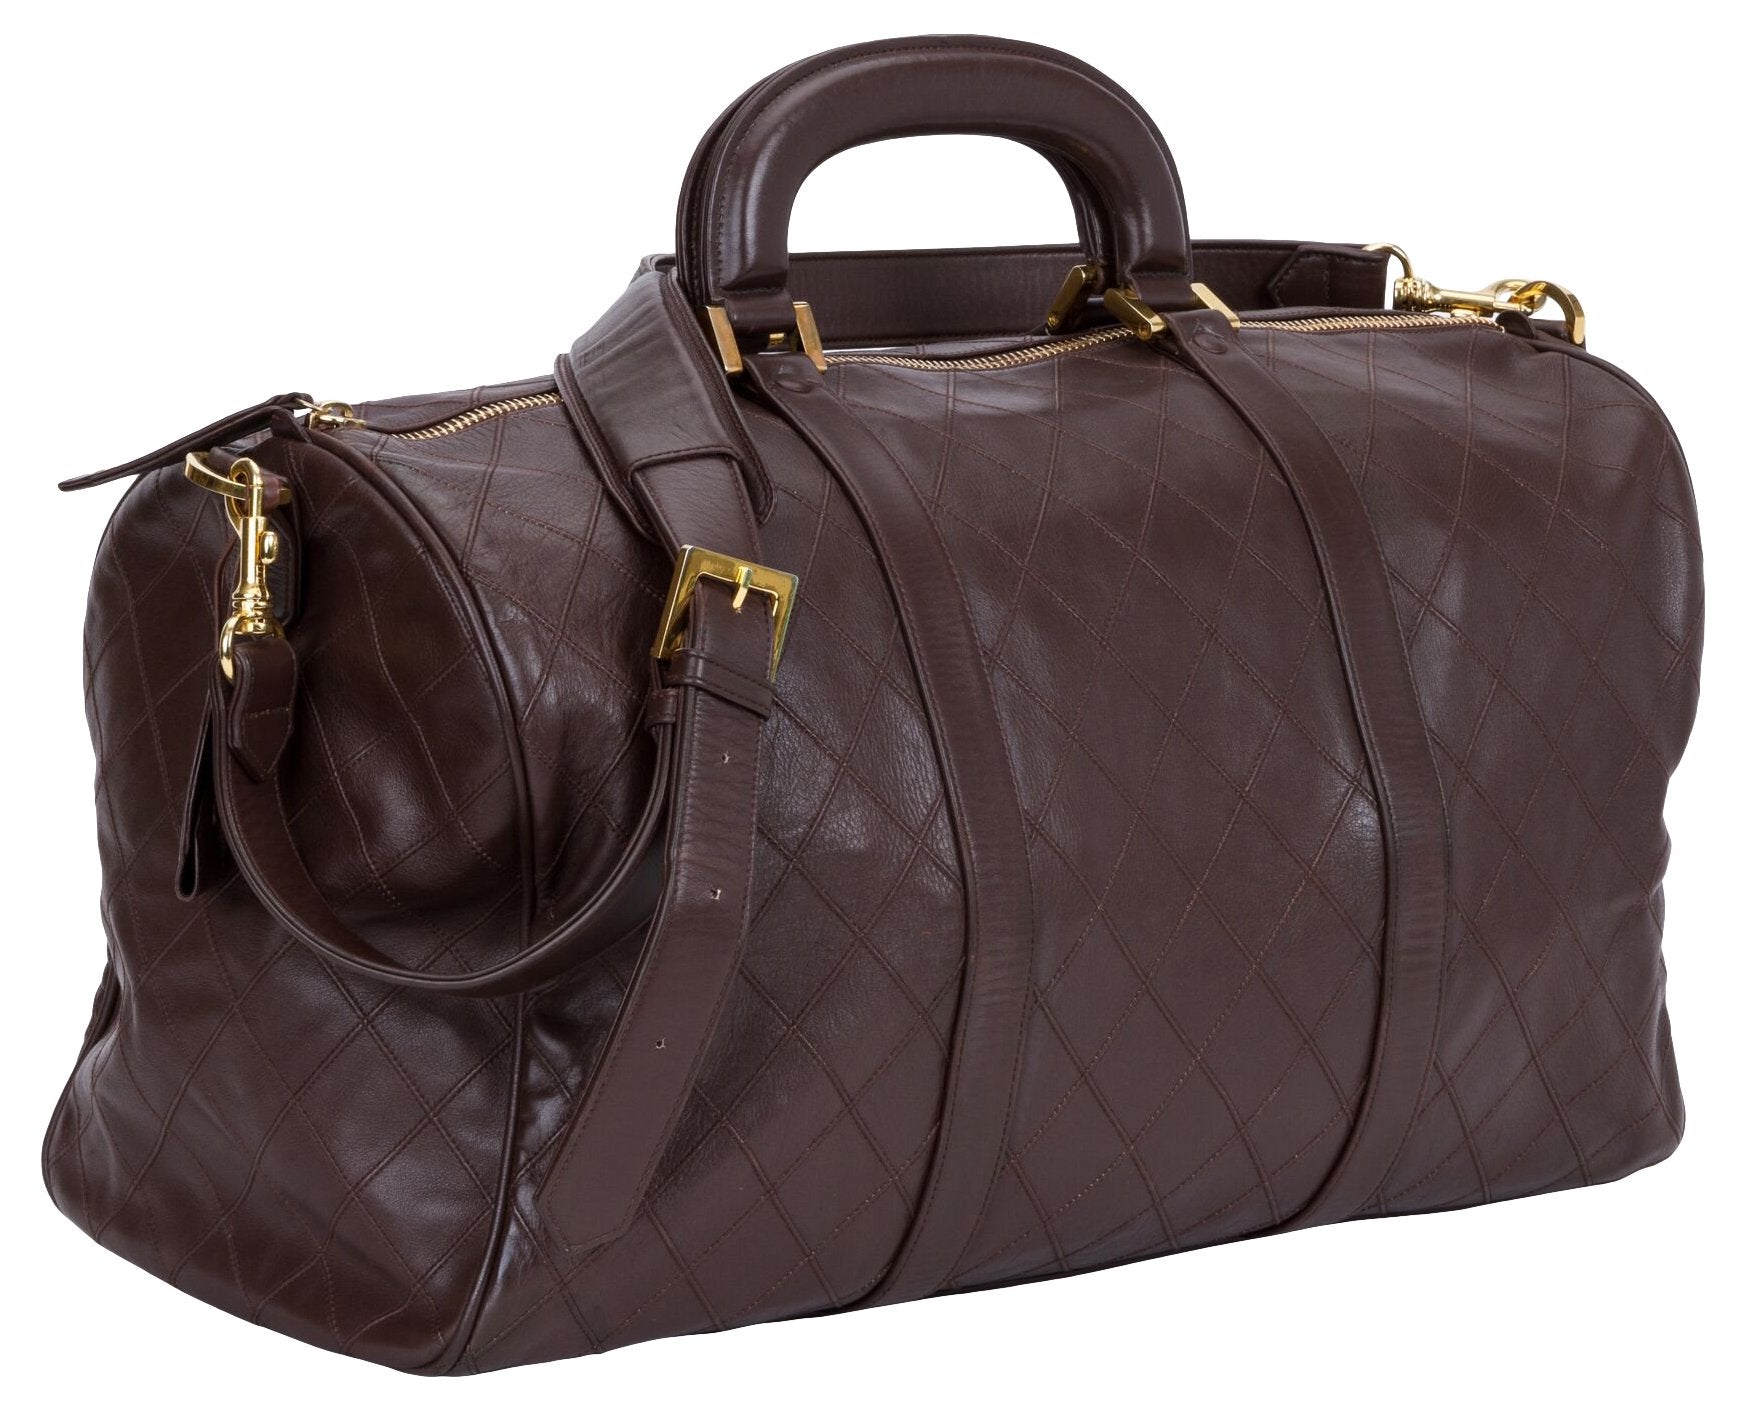 Chanel Brown Diamond Quilted Duffel Bag - Vintage Lux